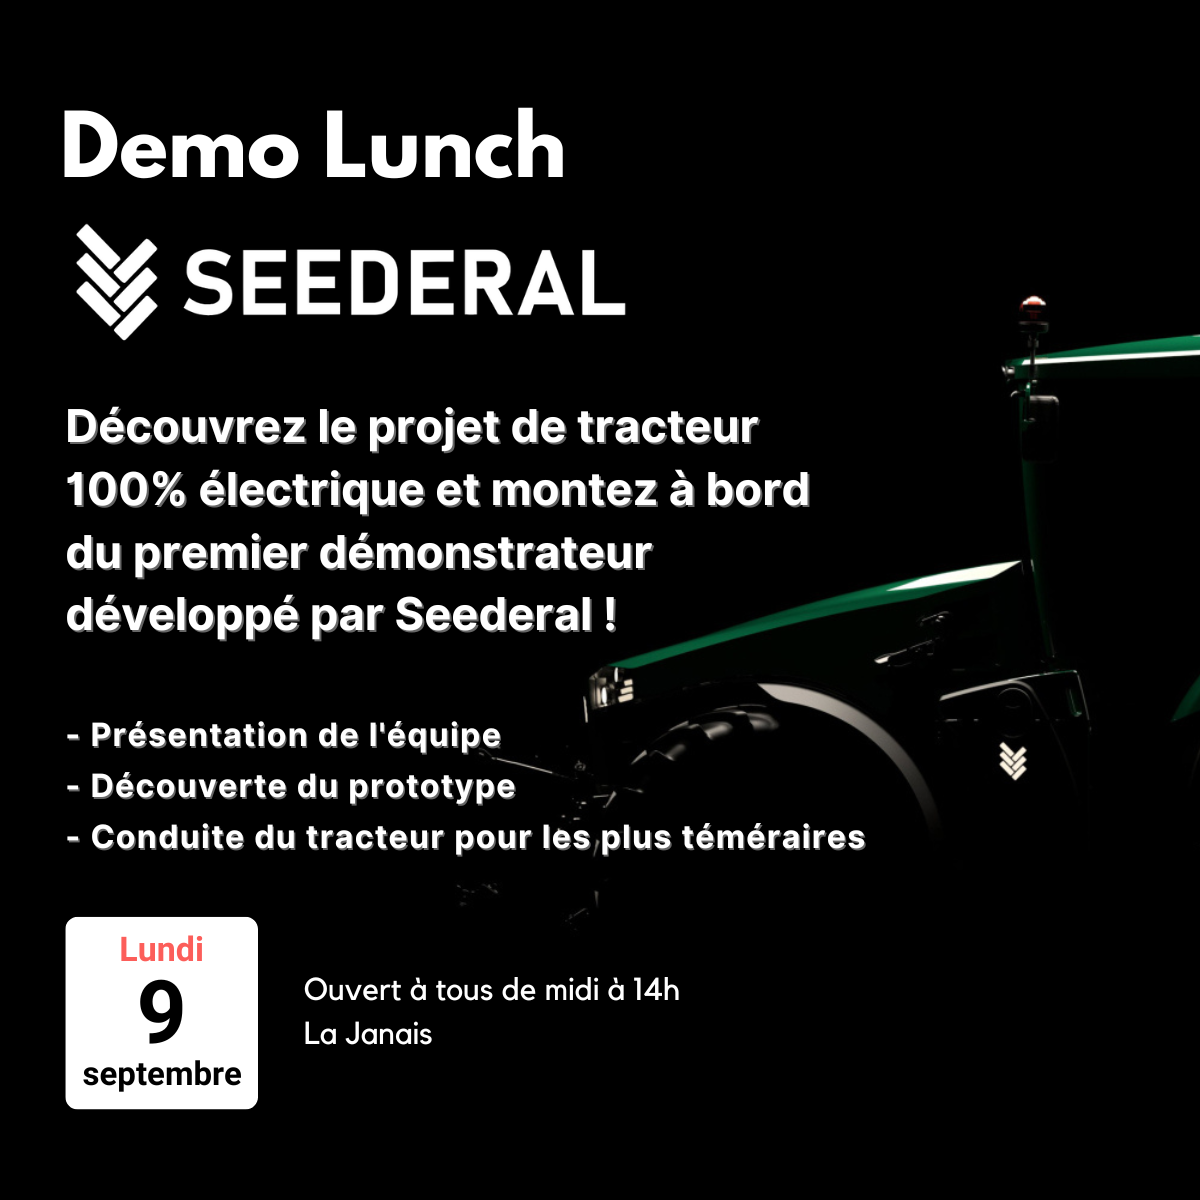 Demo Lunch Seederal